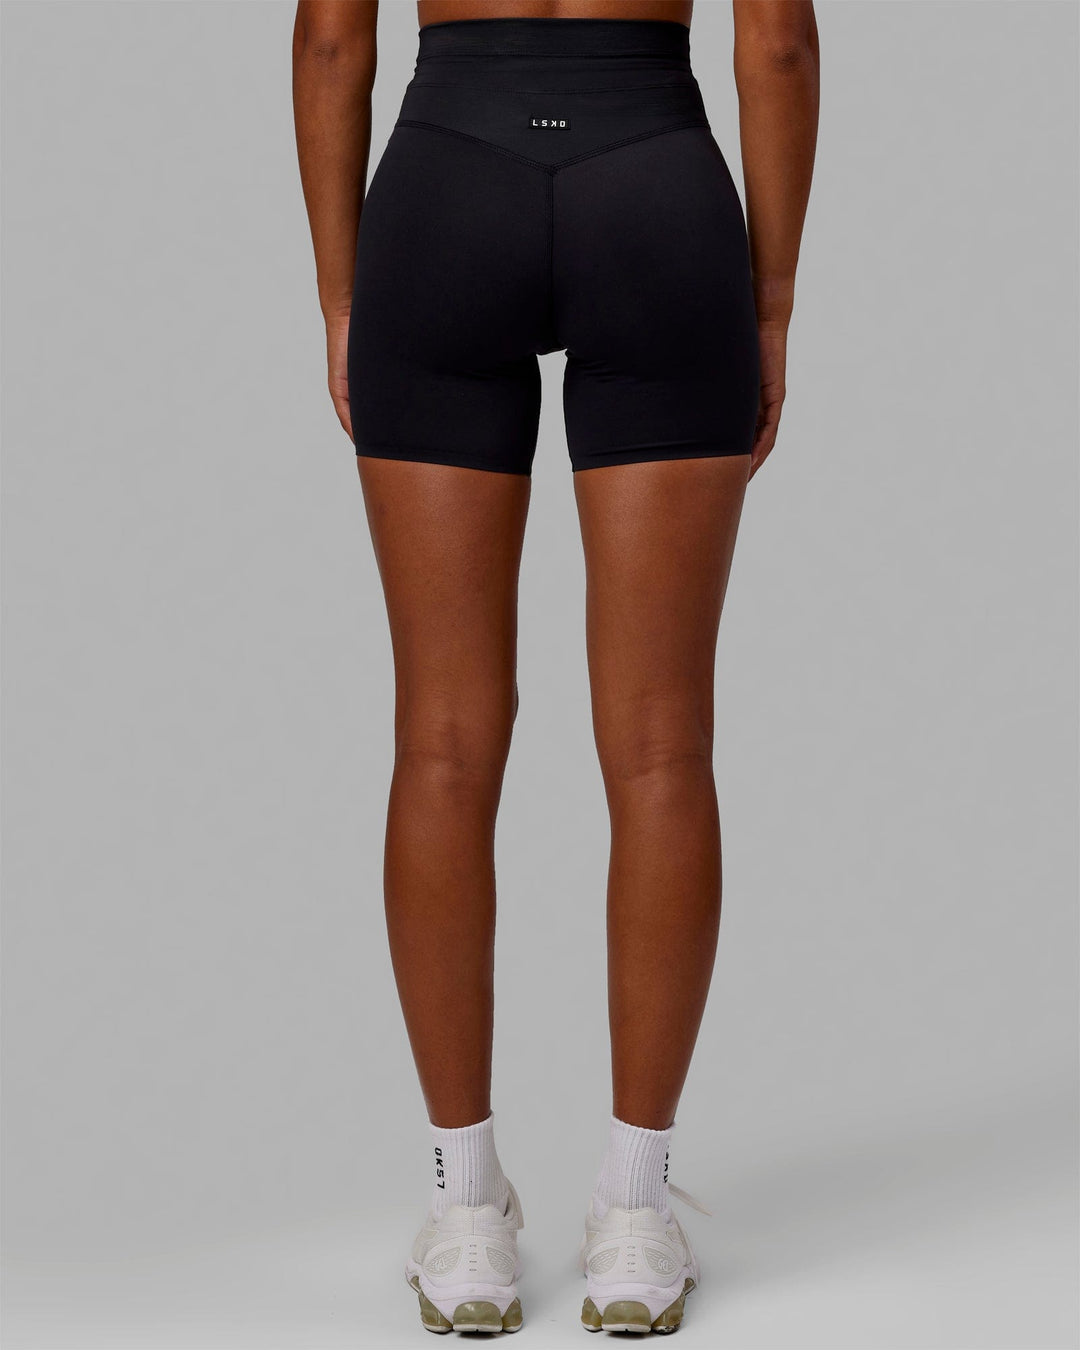 Woman wearing Resistance Mid-Length Shorts - Black